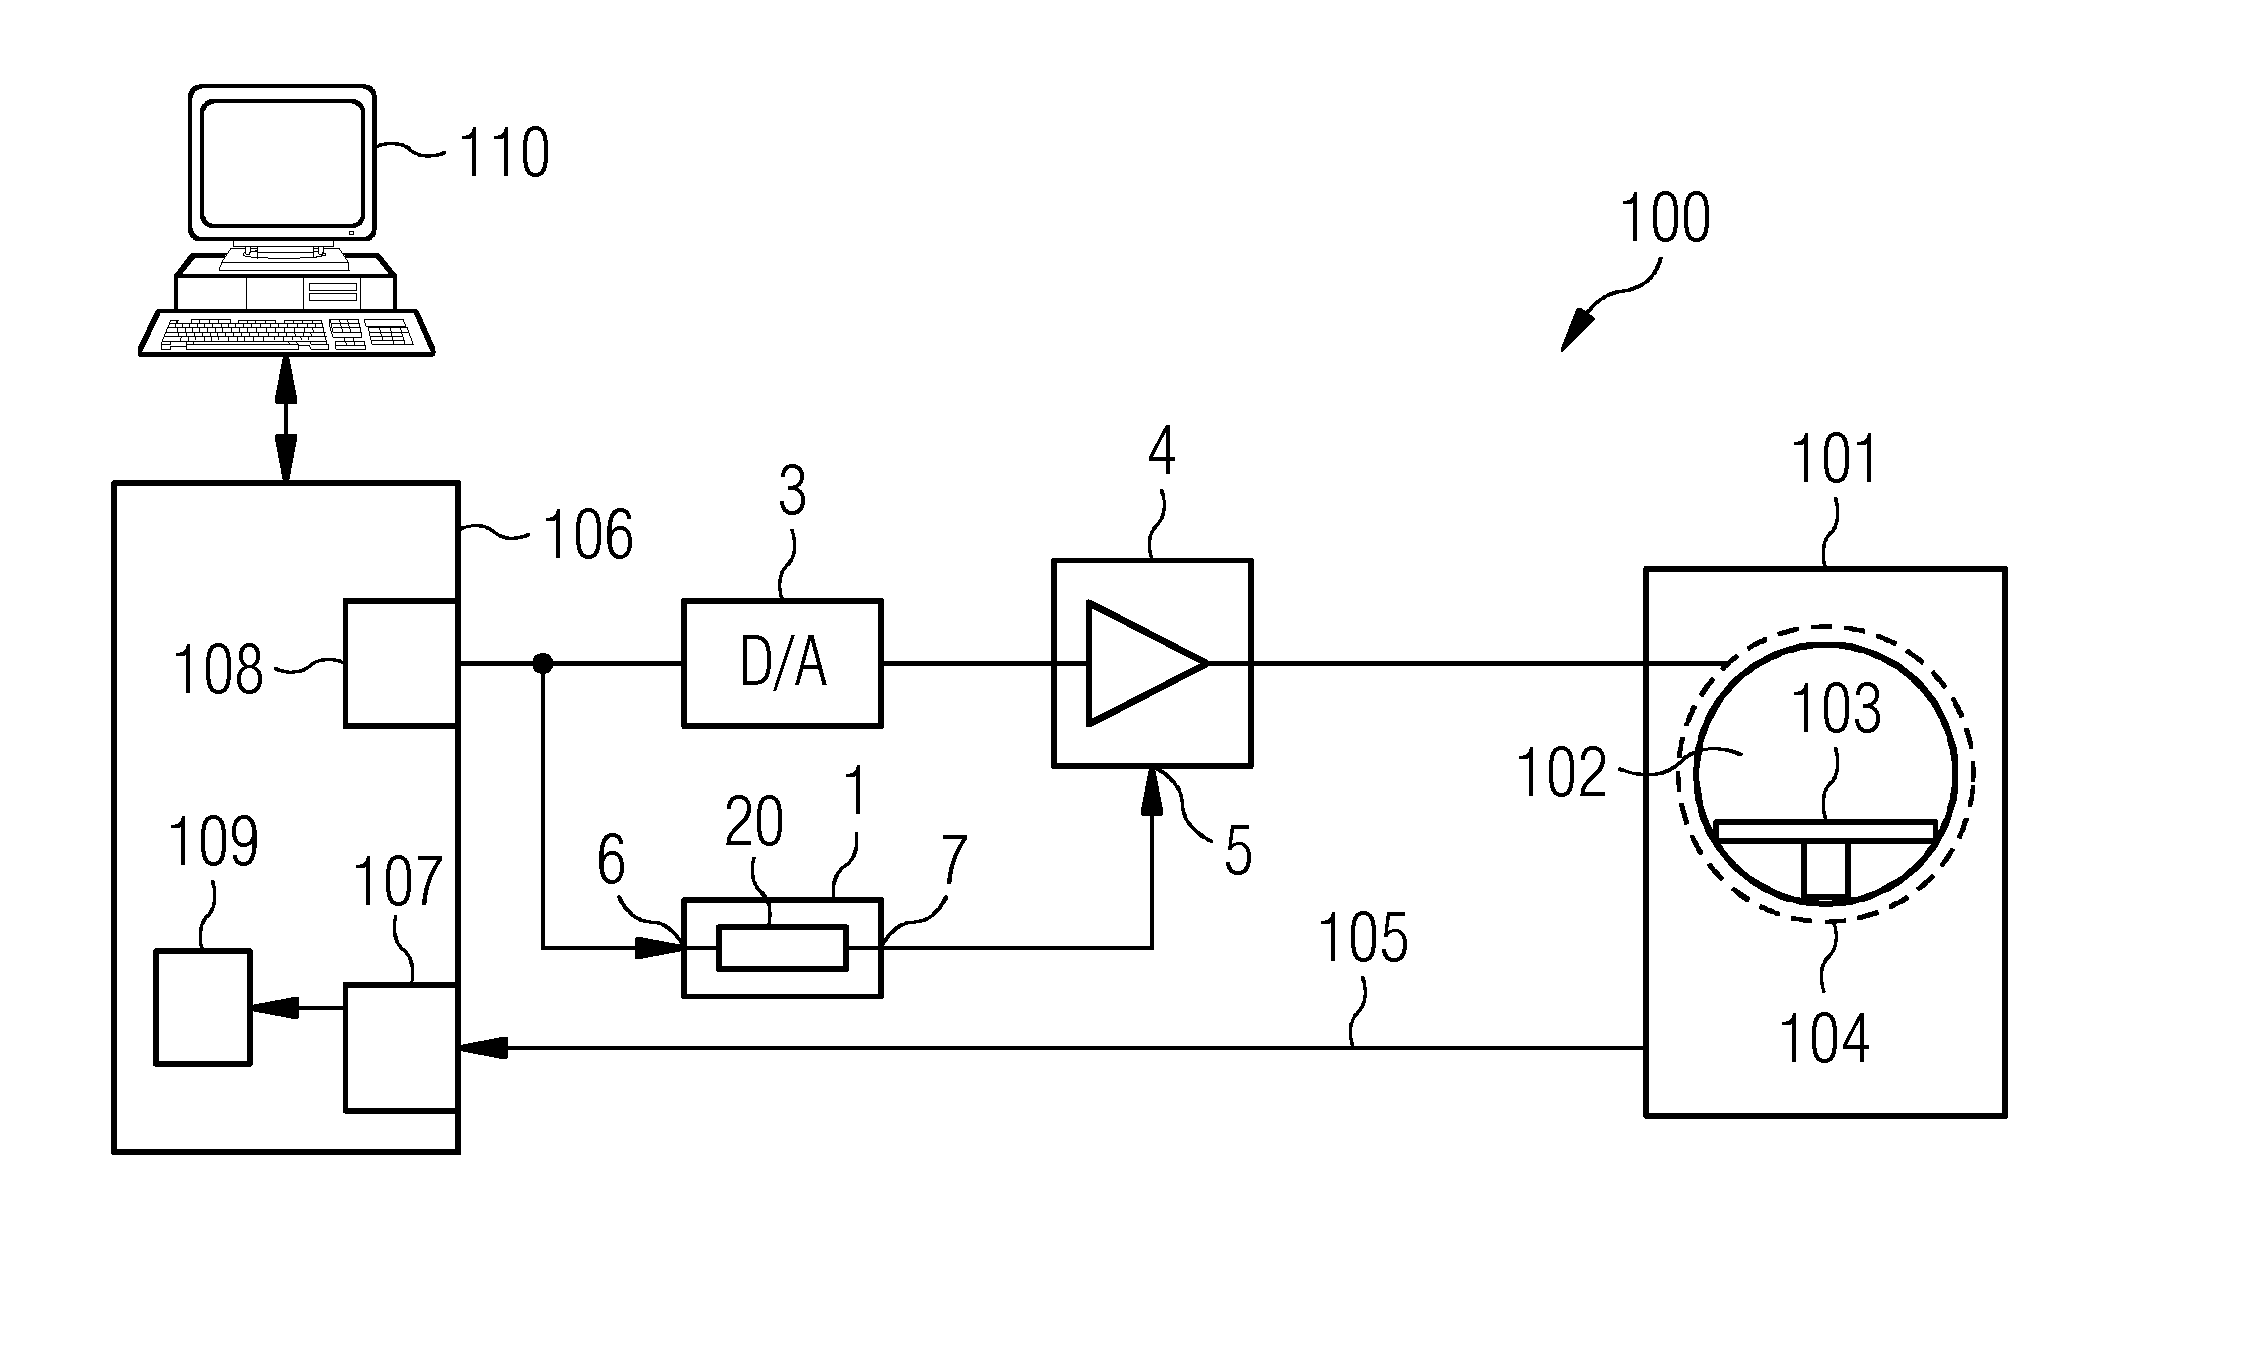 Method for Operating a Coil and a Monitoring Module